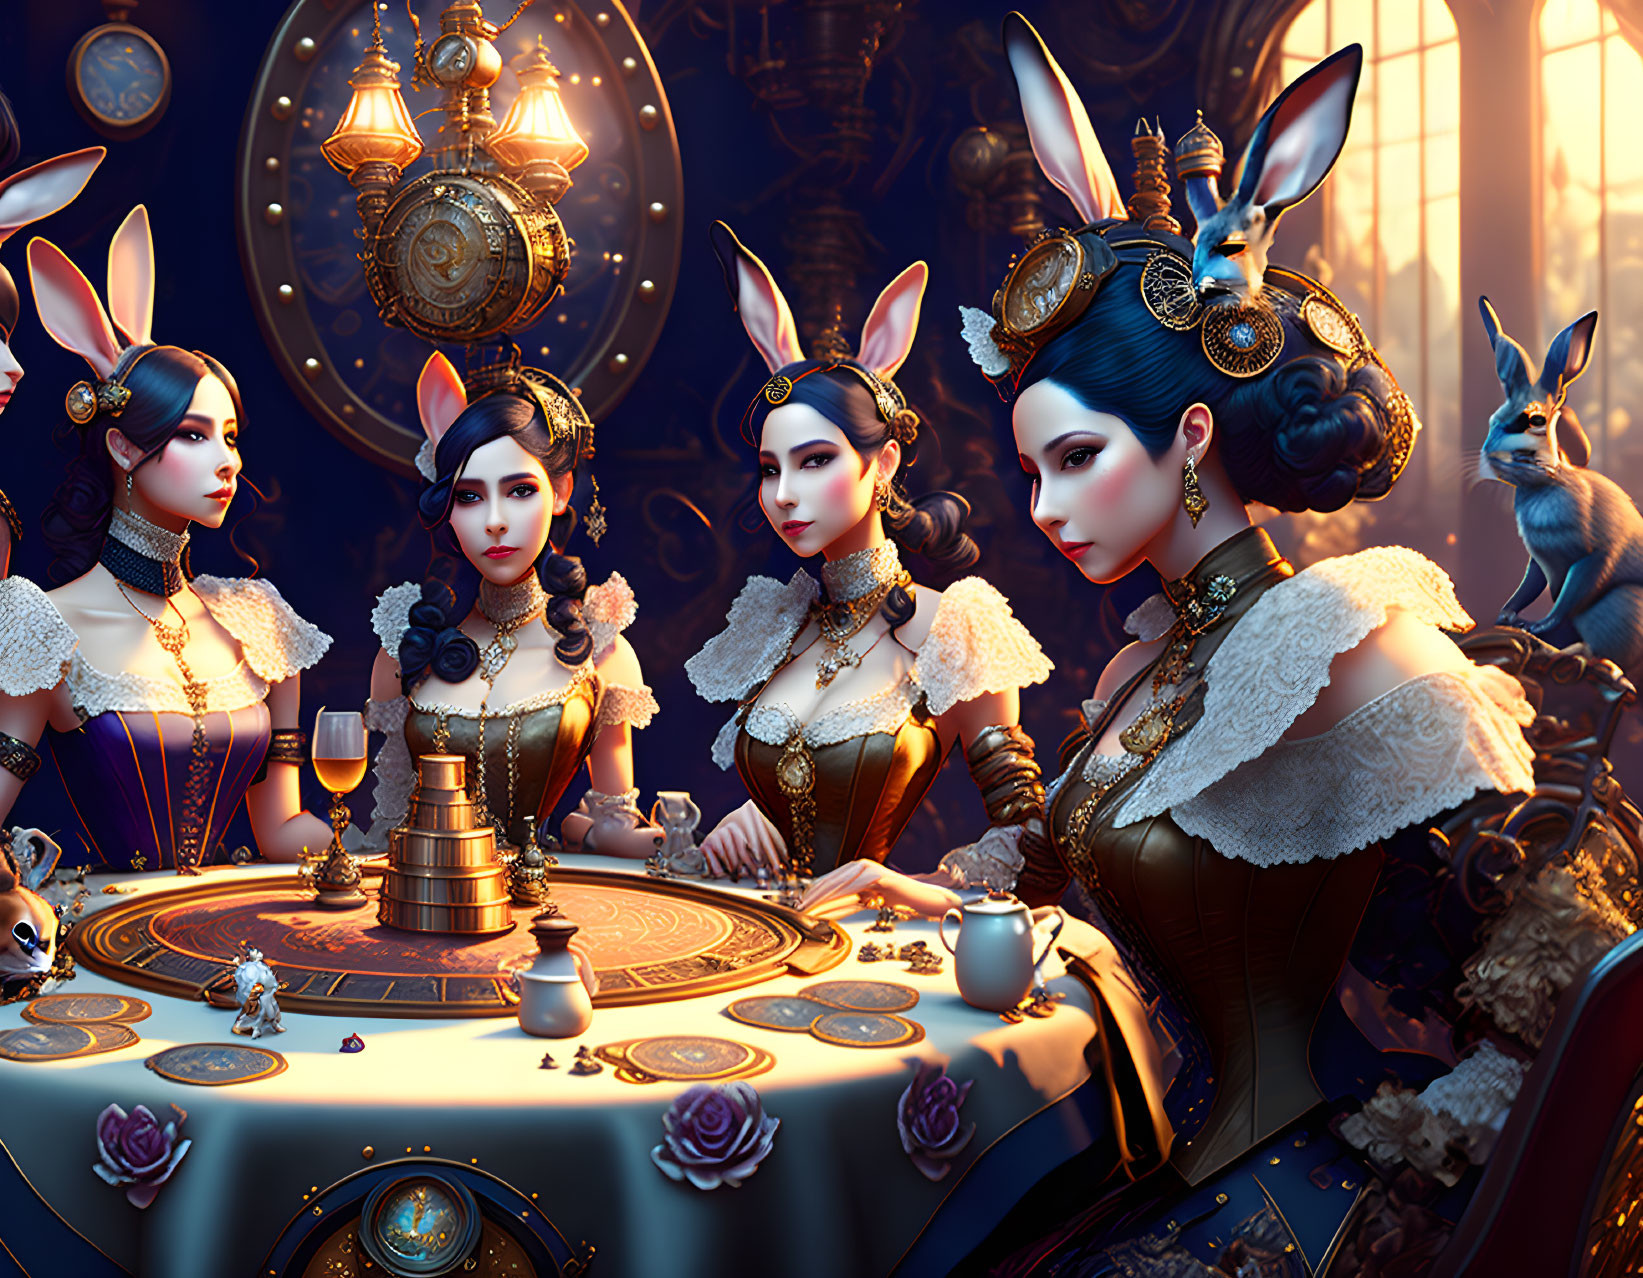 Victorian-themed art with three women in rabbit ears at ornate table